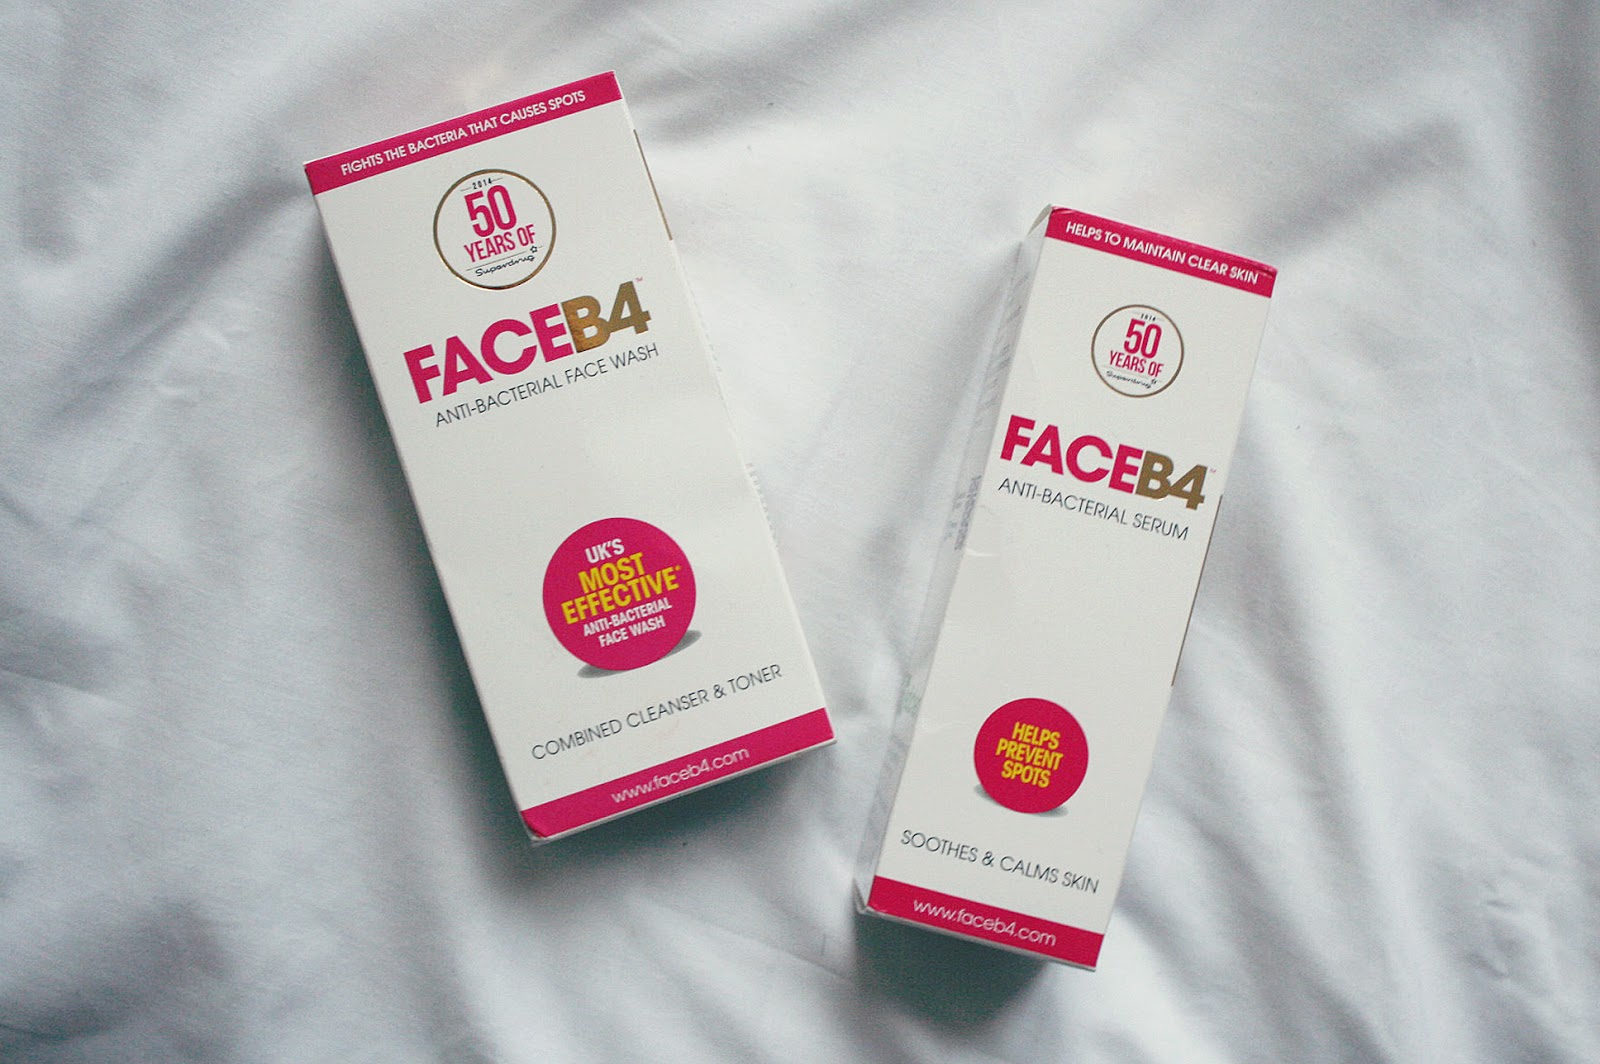 FaceB4 – Review